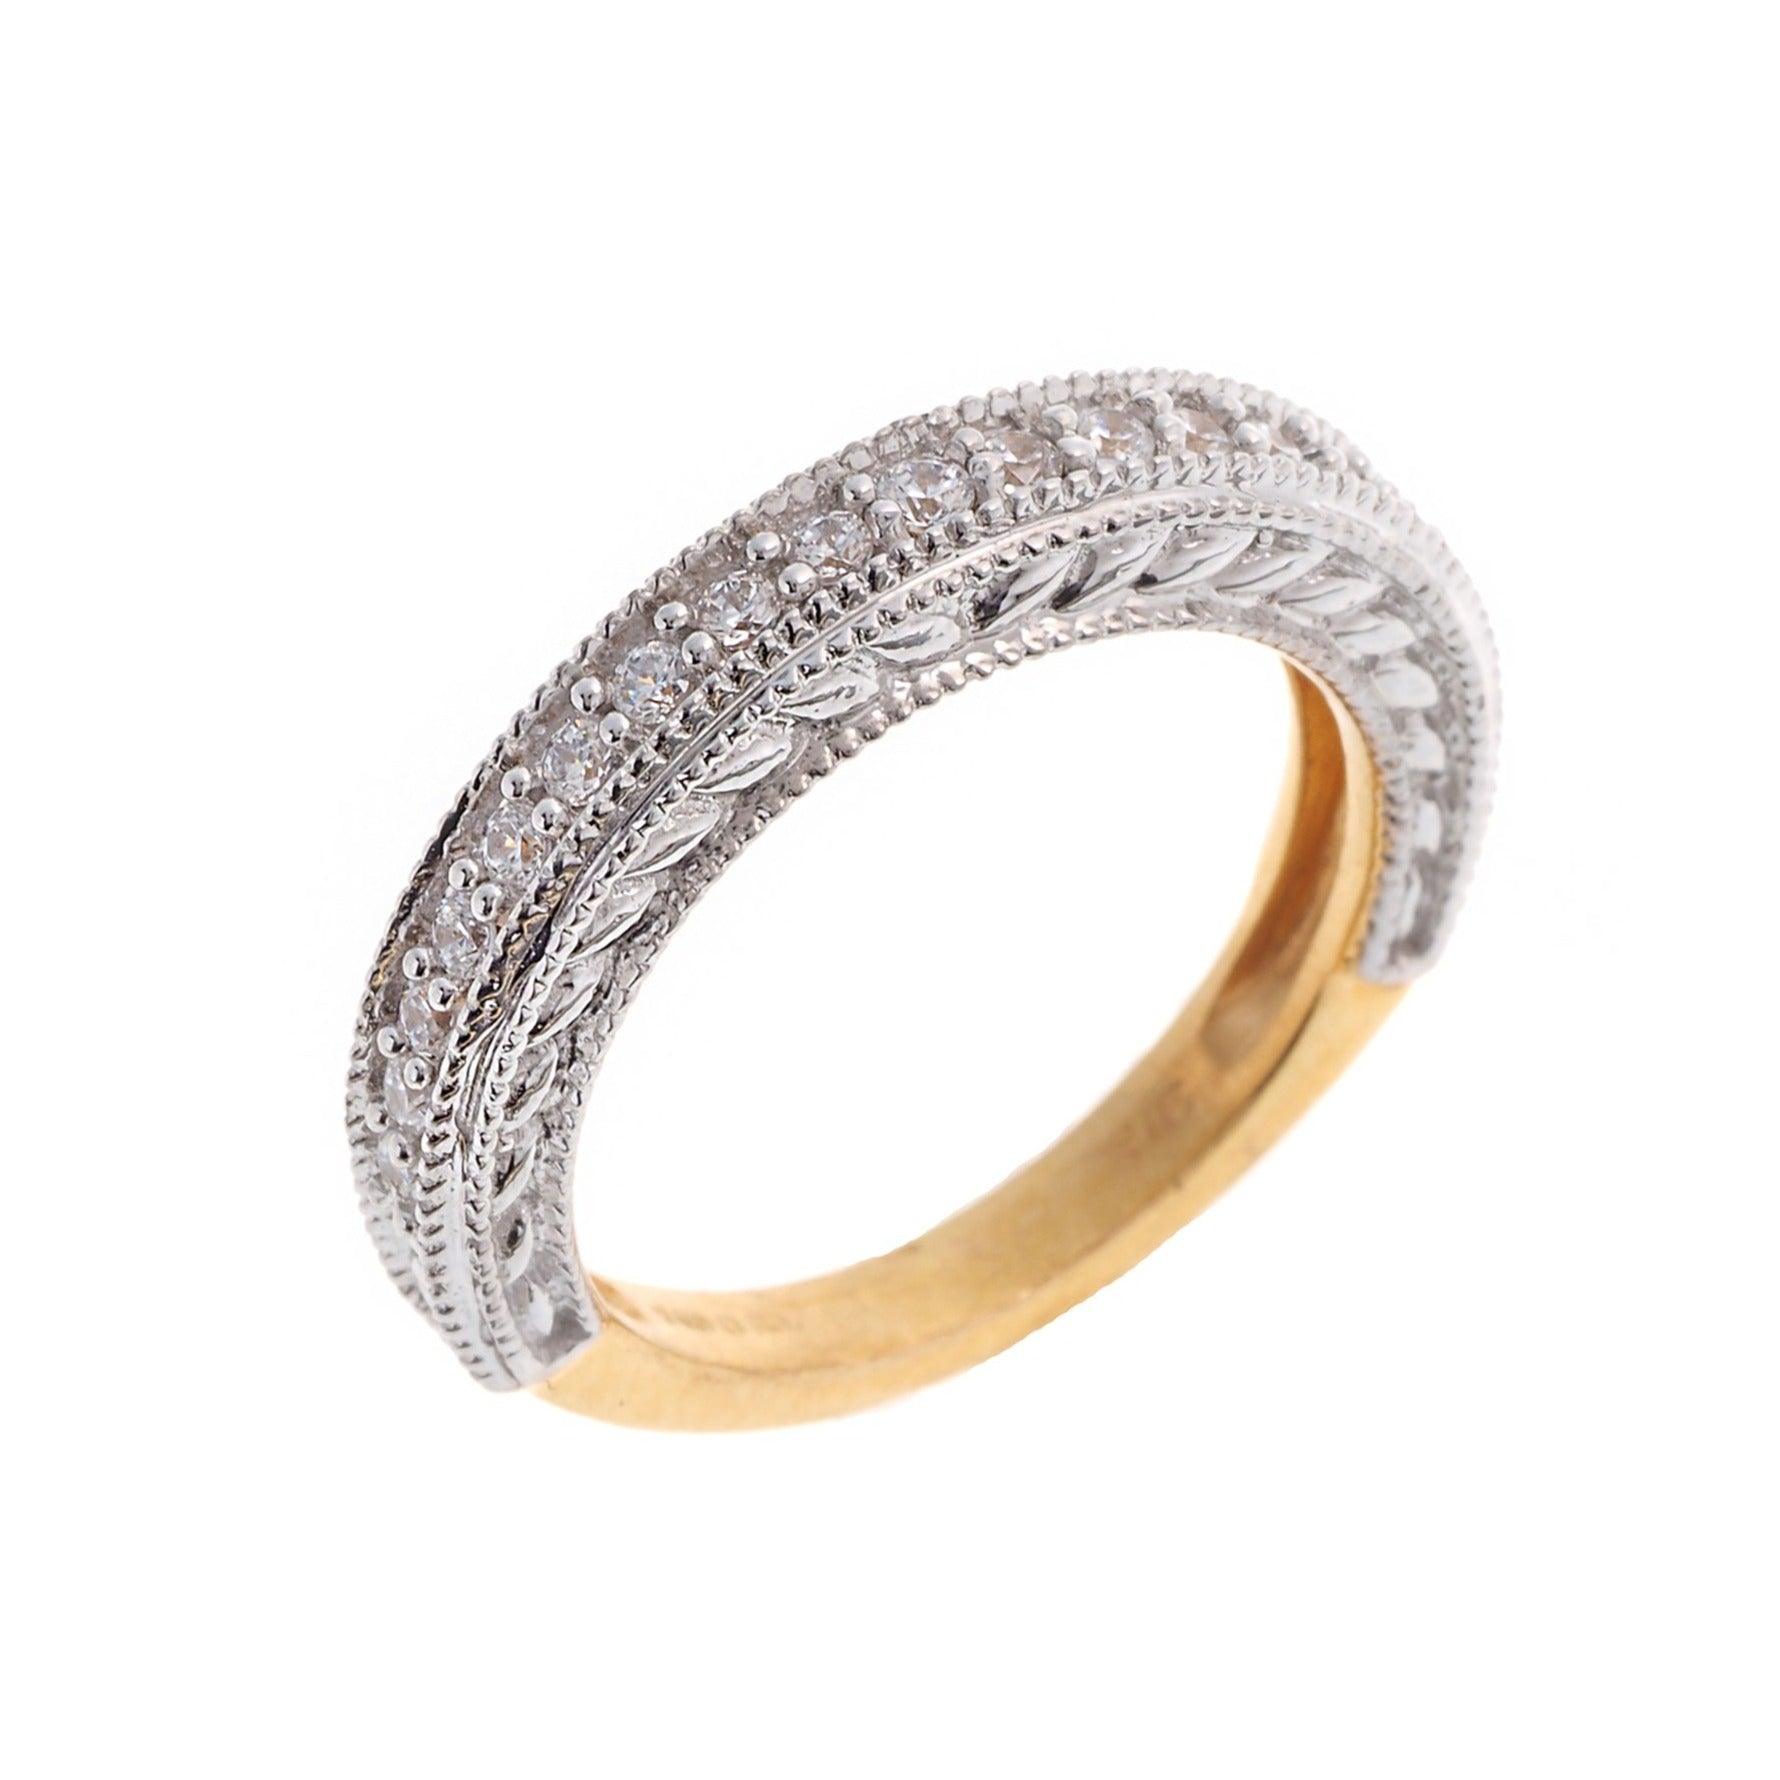 22ct Gold 3/4 Eternity Cubic Zirconia Ring VLR402 - Minar Jewellers